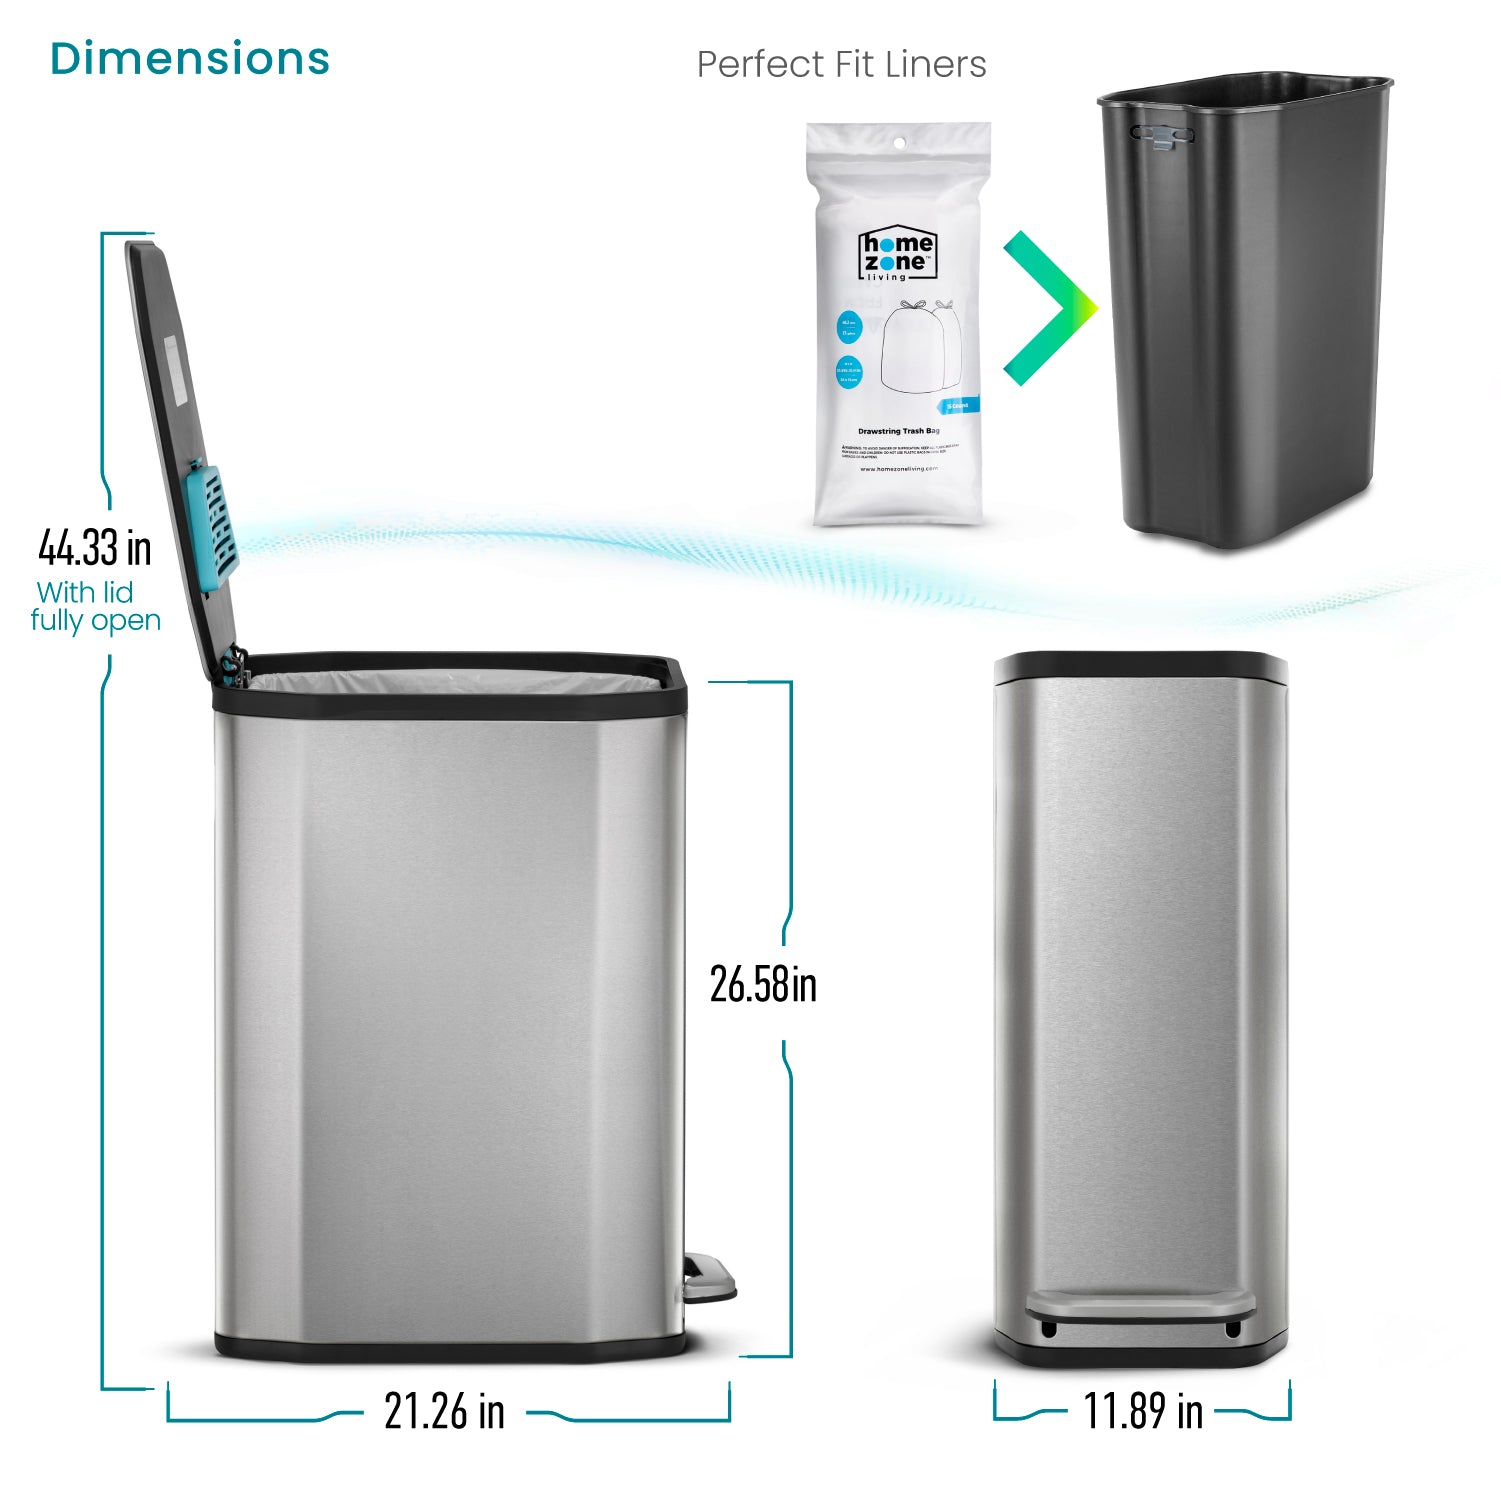 13 Gallon Slim Kitchen Trash Can with CLEANAURA, 50 Liters - Home Zone Living